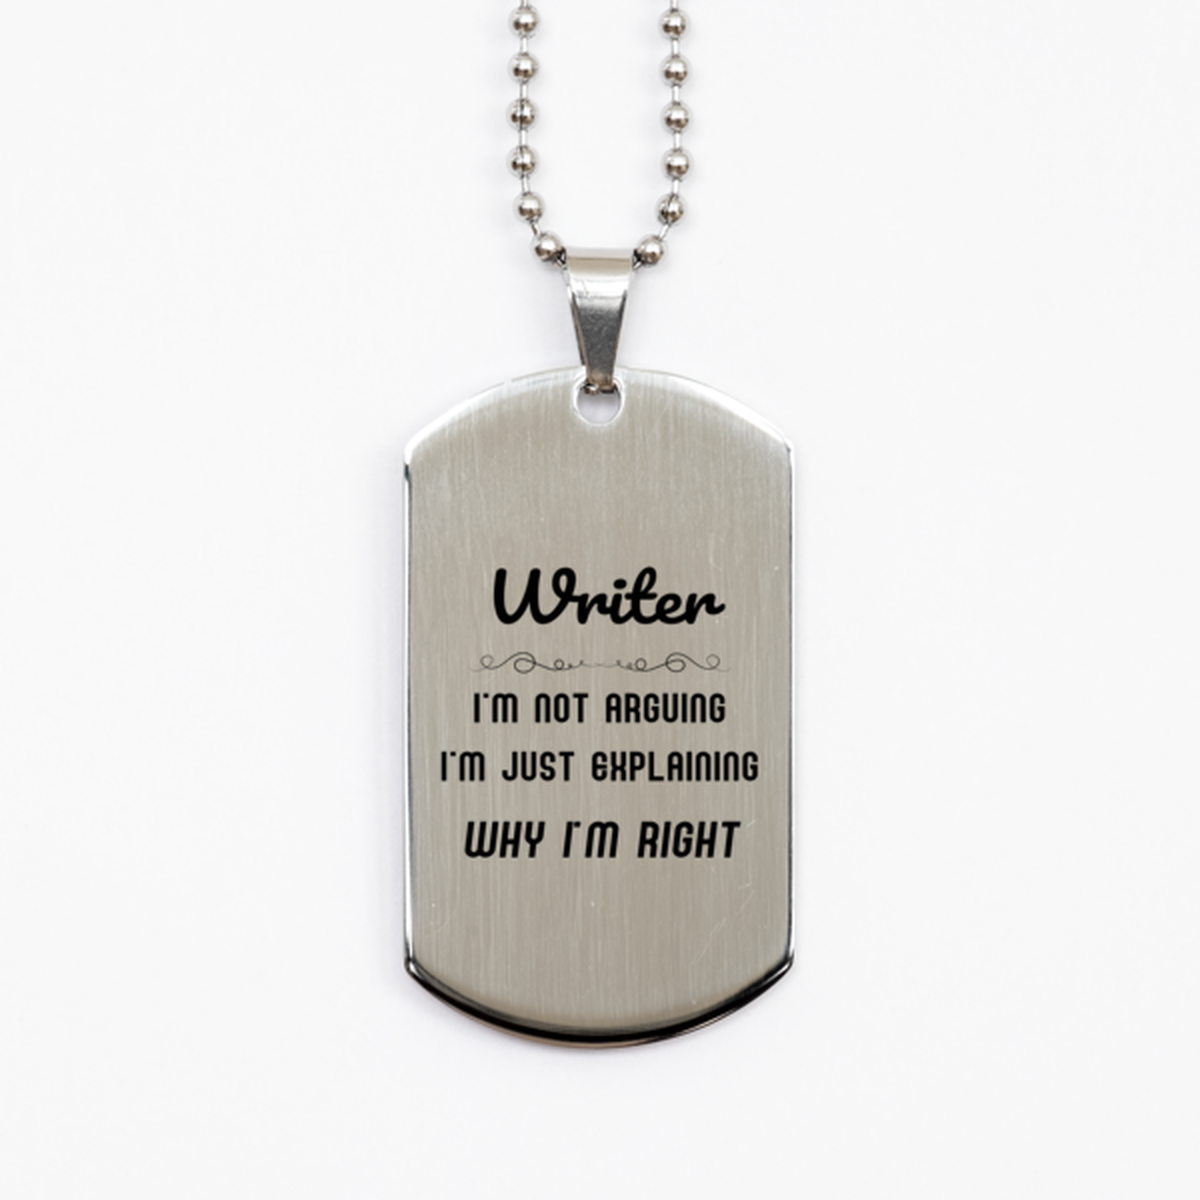 Writer I'm not Arguing. I'm Just Explaining Why I'm RIGHT Silver Dog Tag, Funny Saying Quote Writer Gifts For Writer Graduation Birthday Christmas Gifts for Men Women Coworker